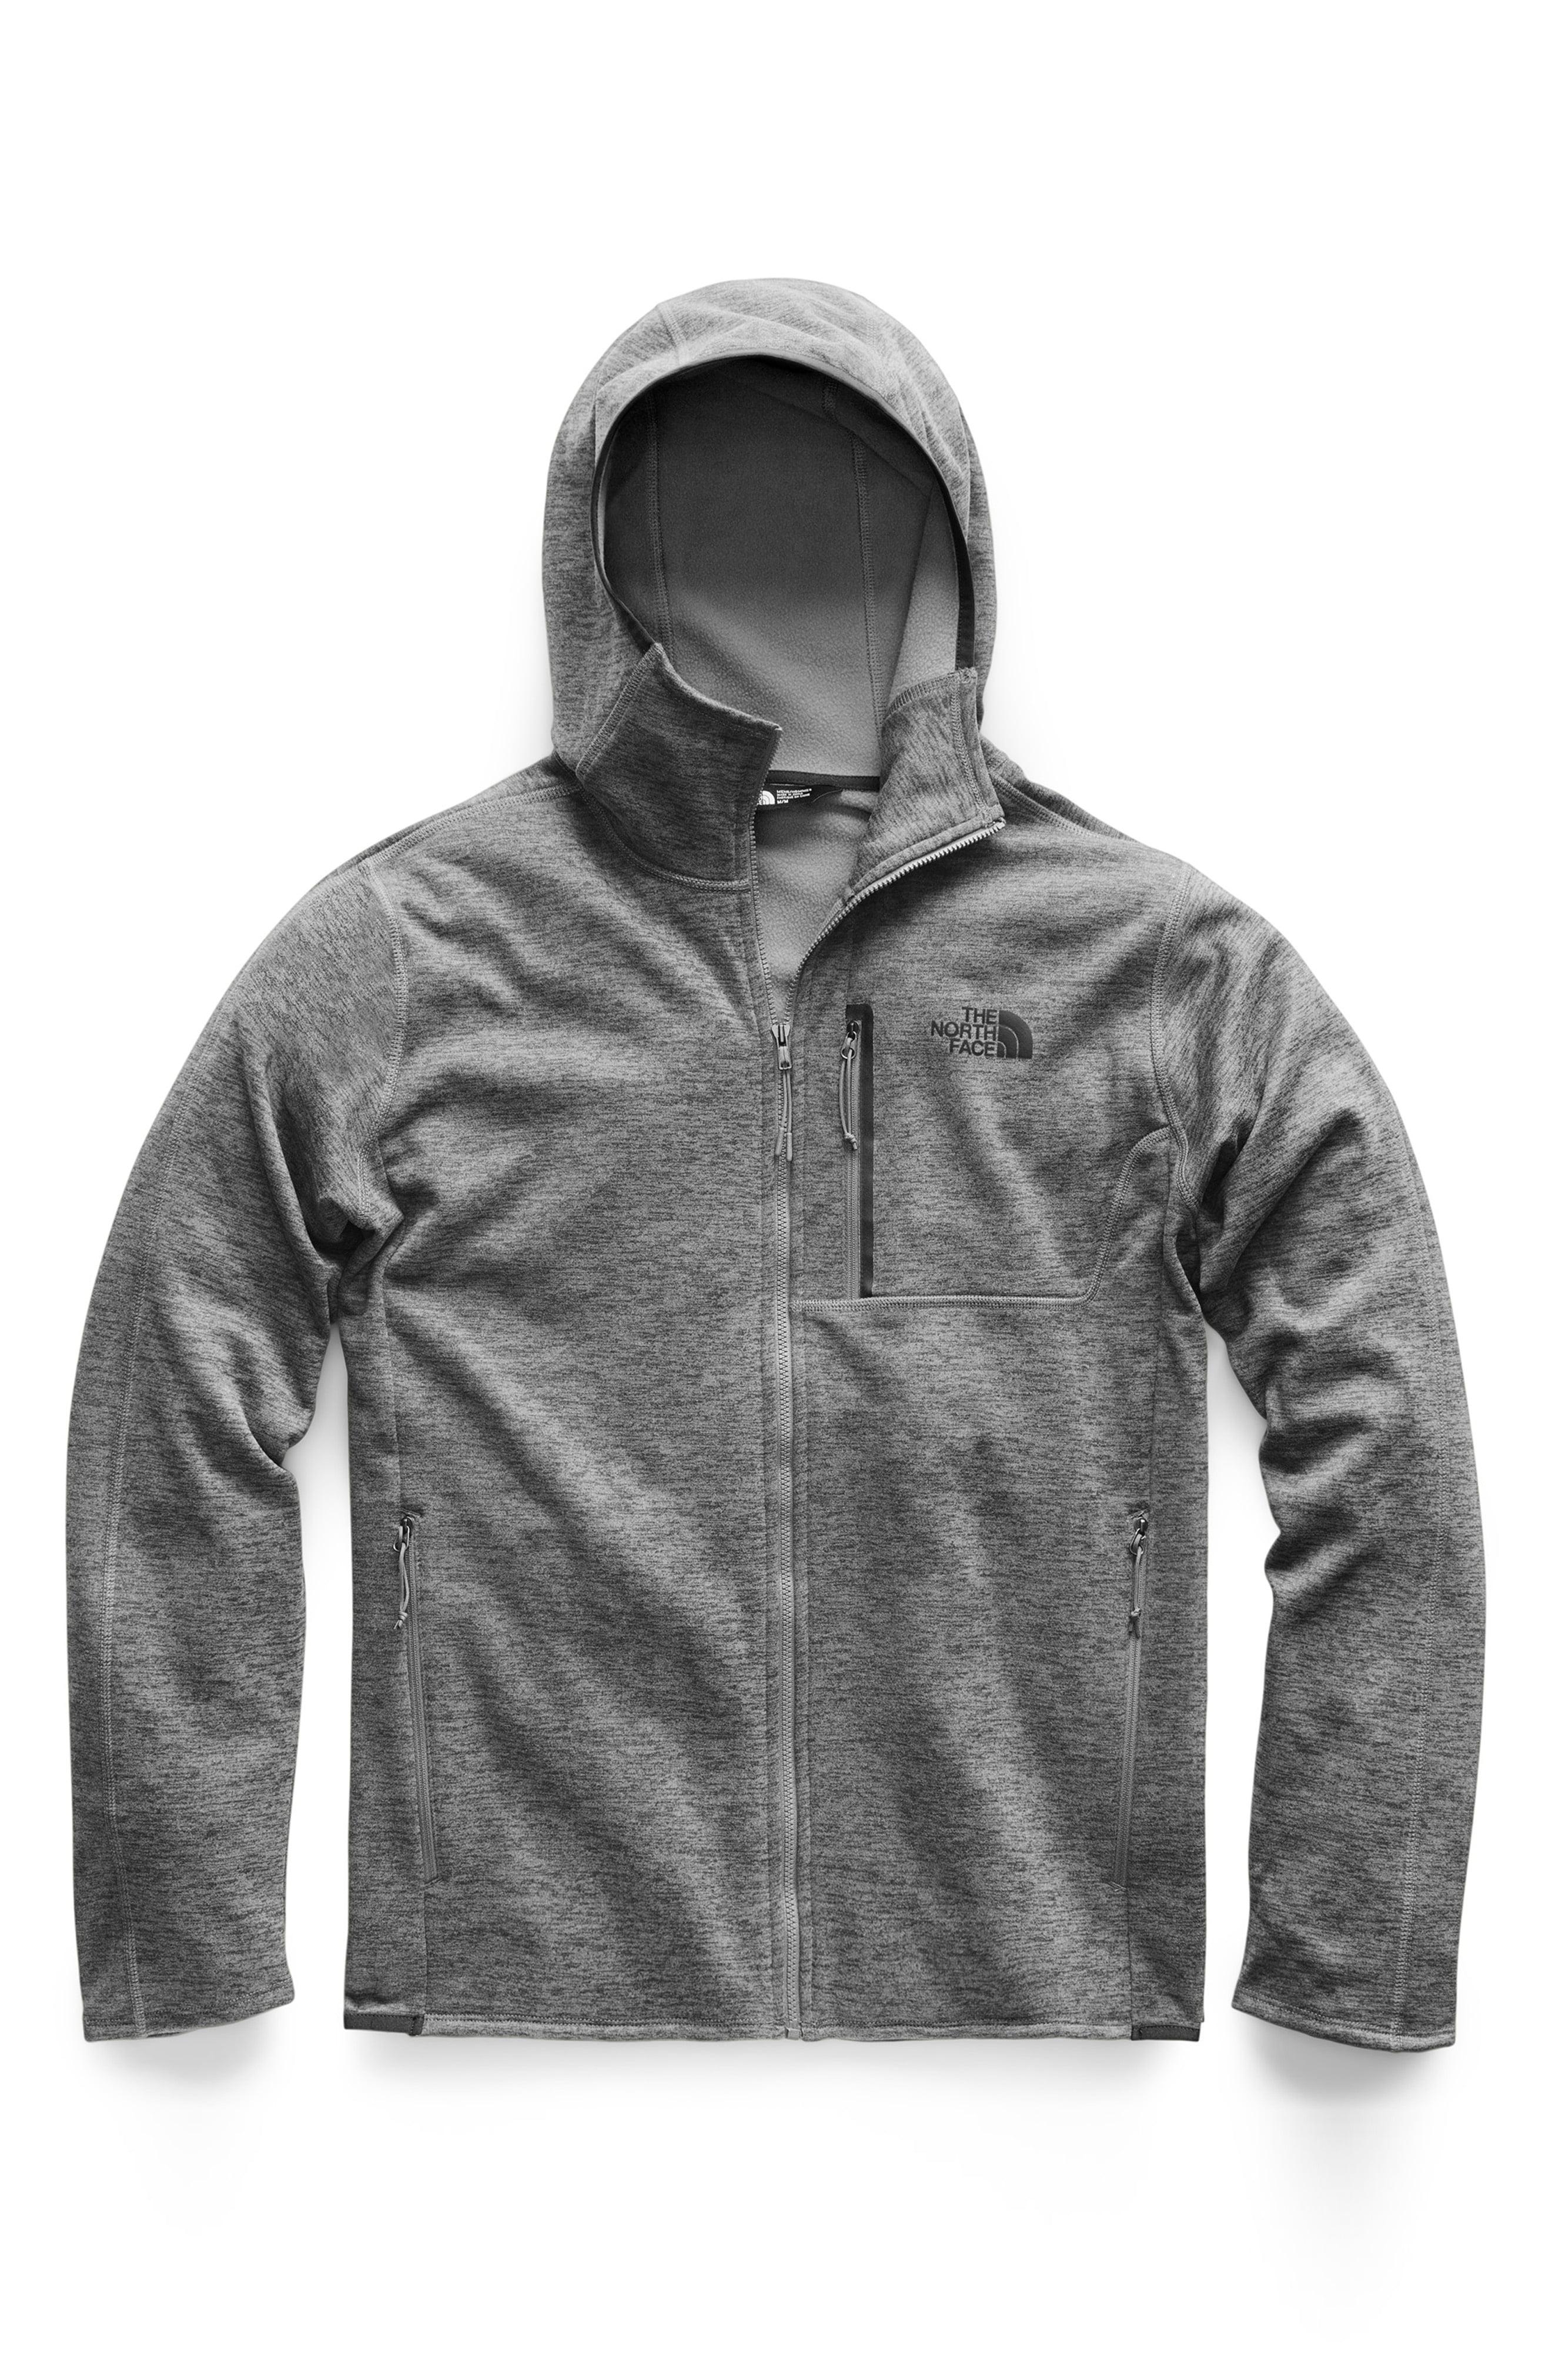 The North Face Fleece Canyonlands Hooded Jacket in Gray for Men - Lyst